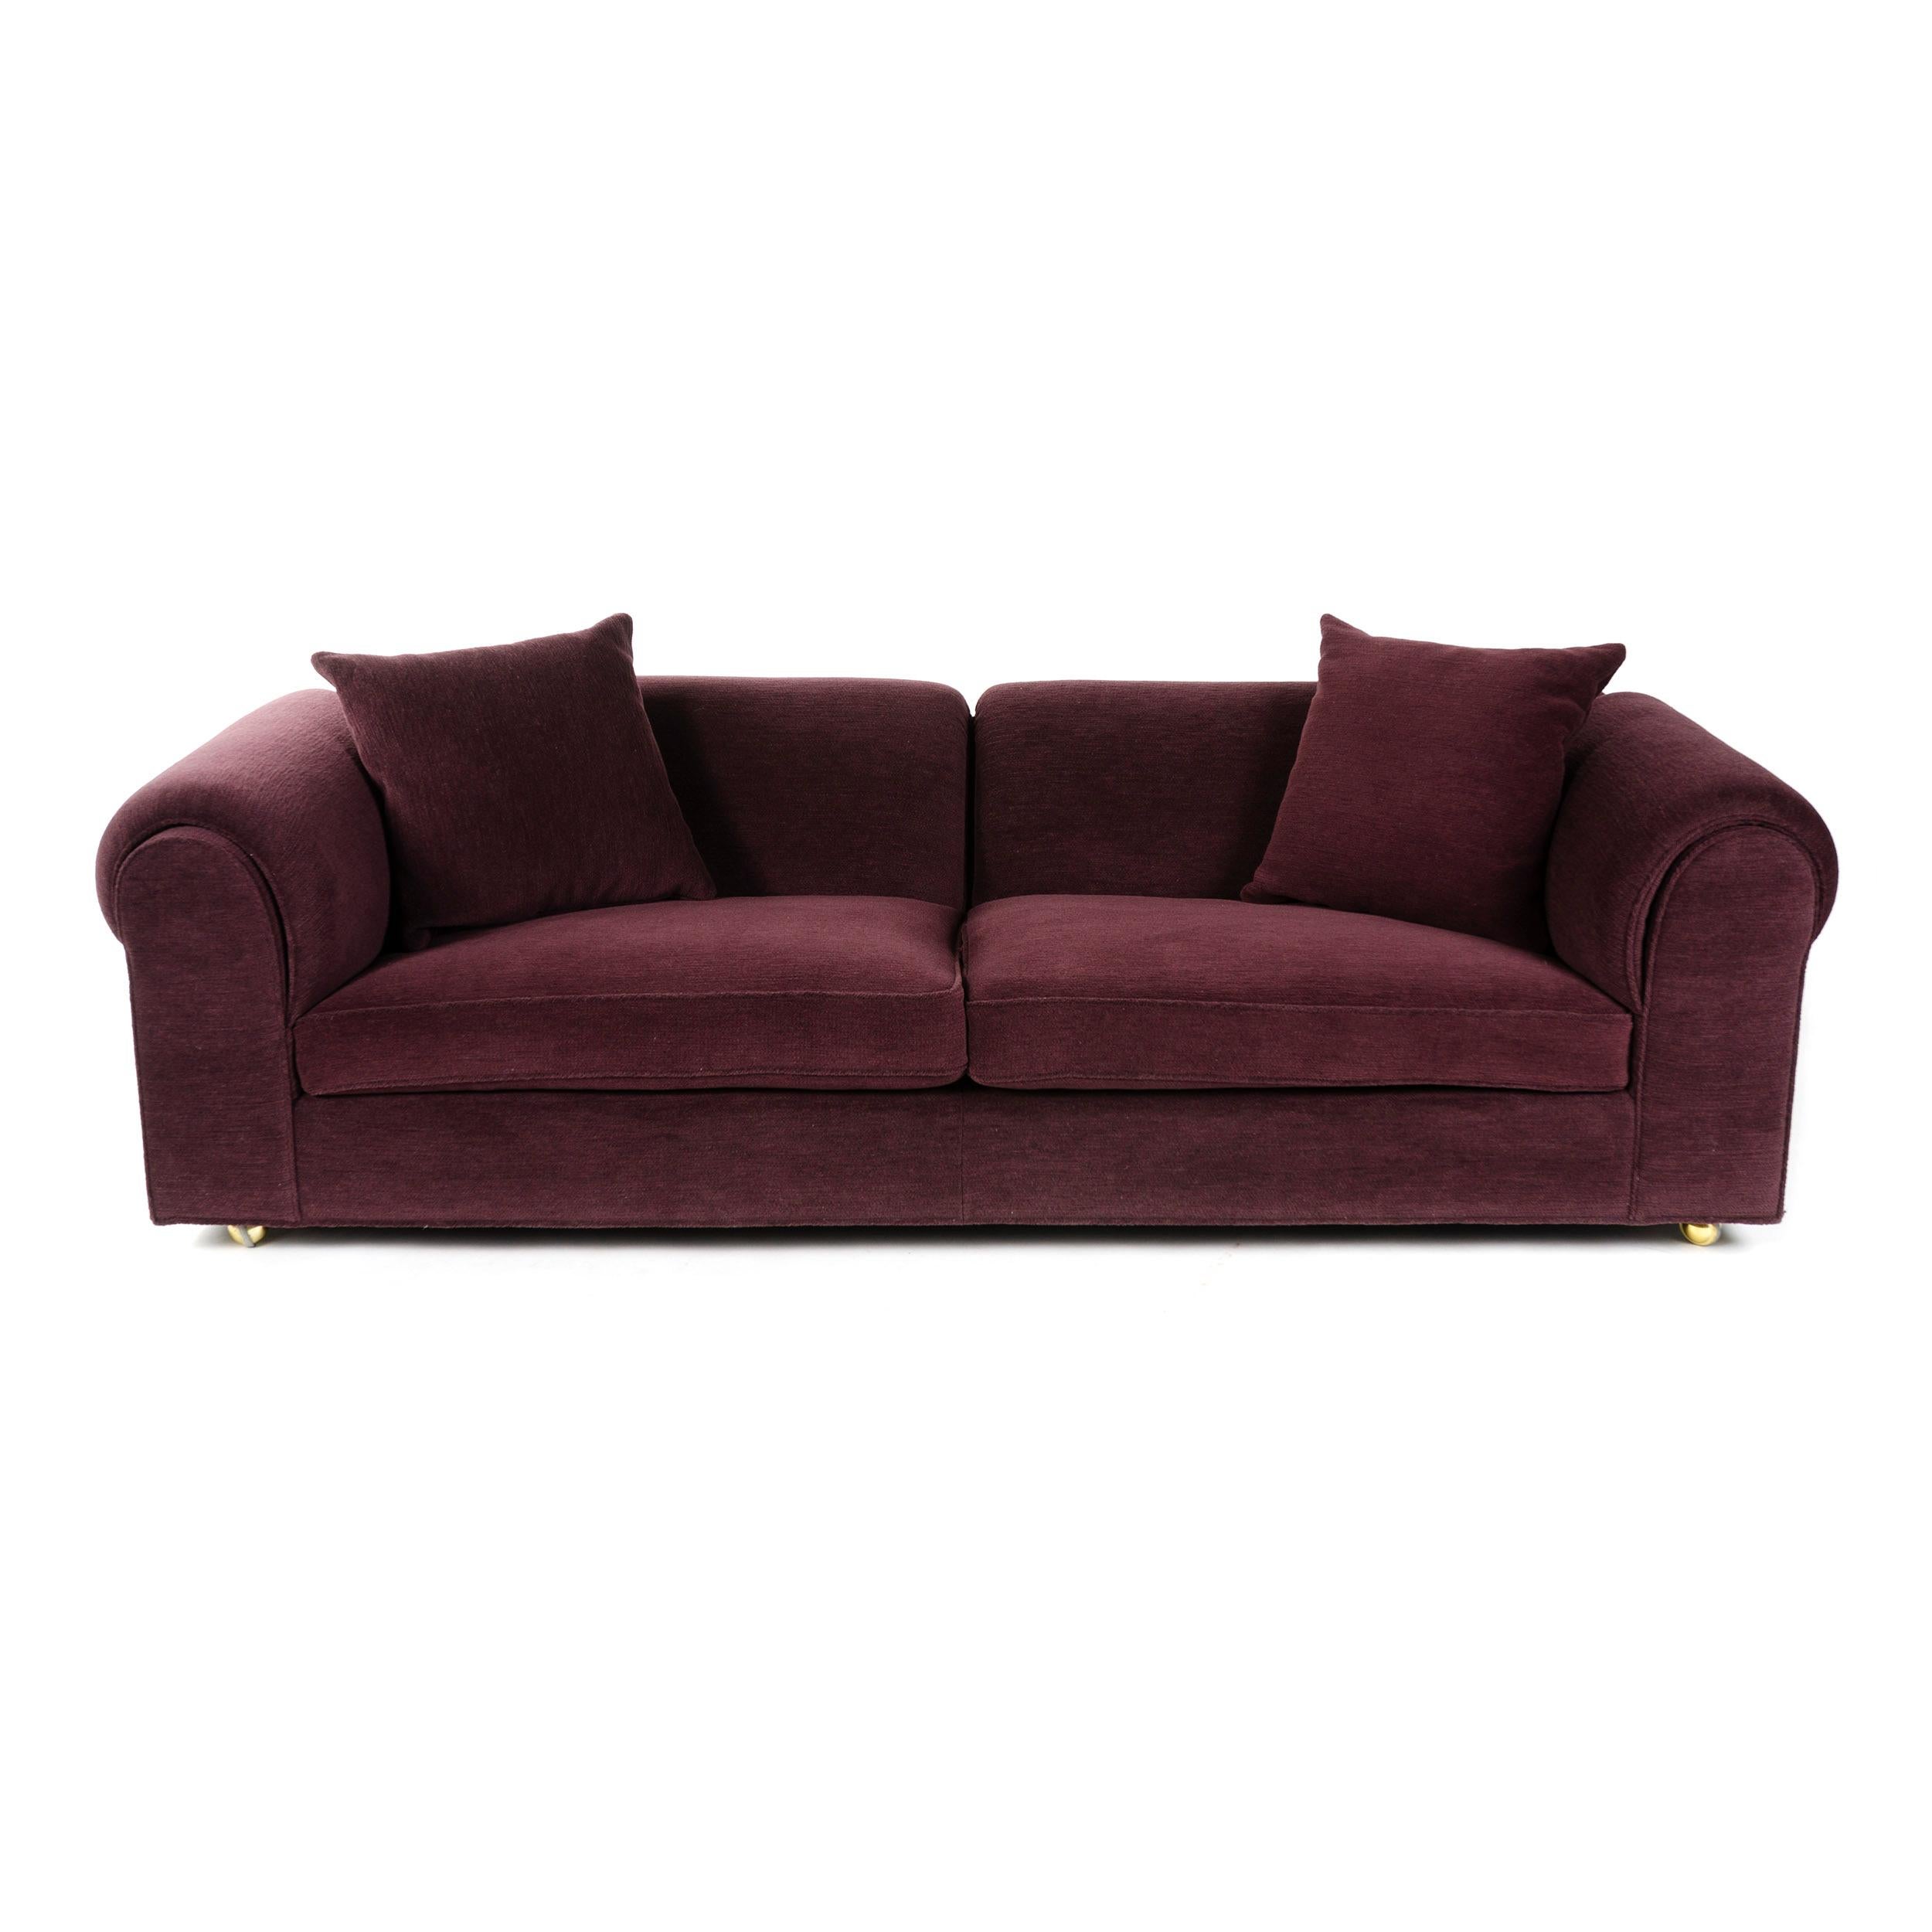 A well scaled sofa with a tight upholstered back and wide arms, newly upholstered in deep purple chenille.